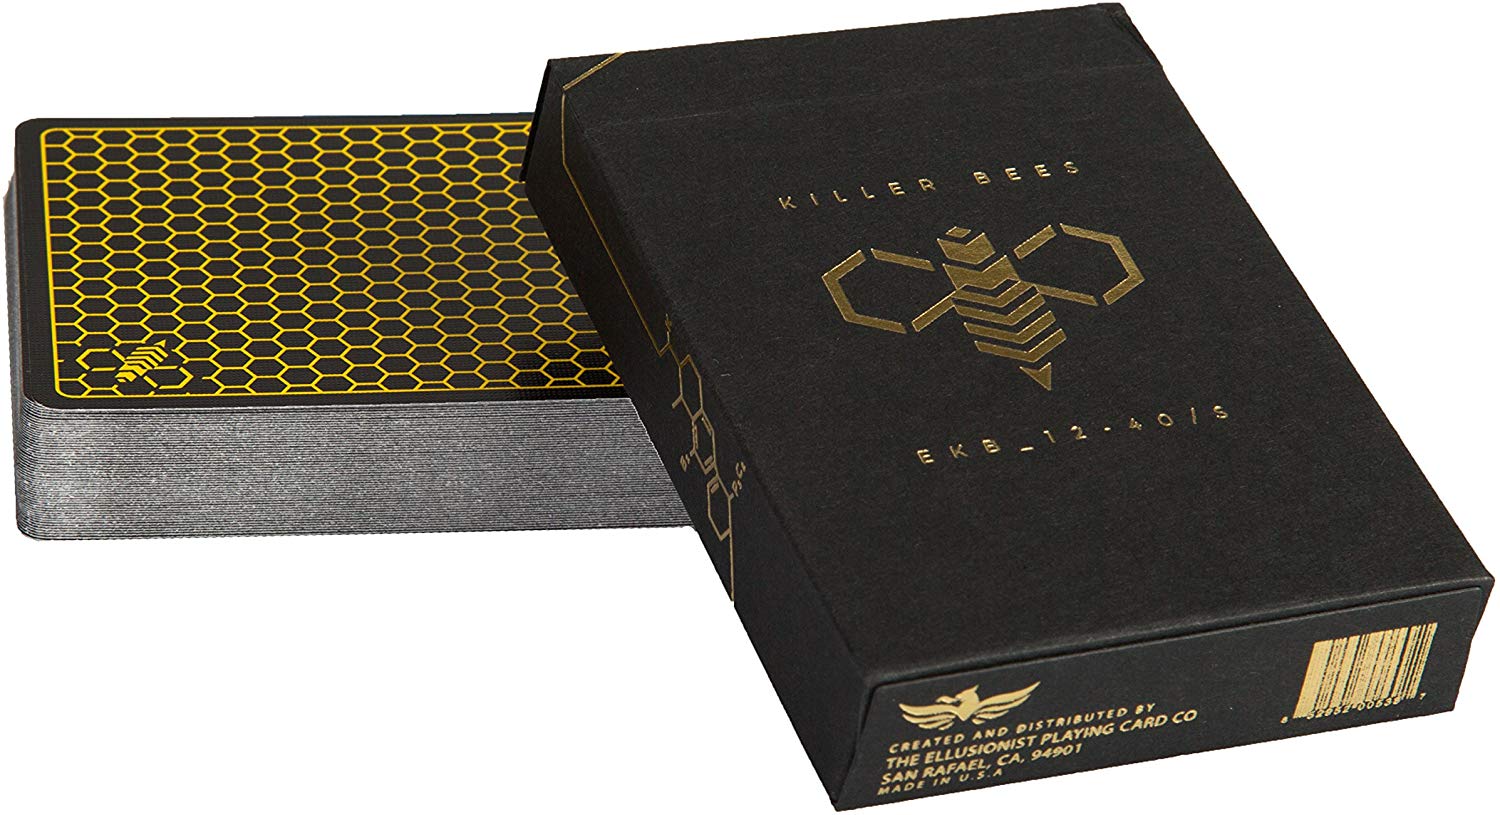 Ellusionist Killer Bees Playing Card Deck